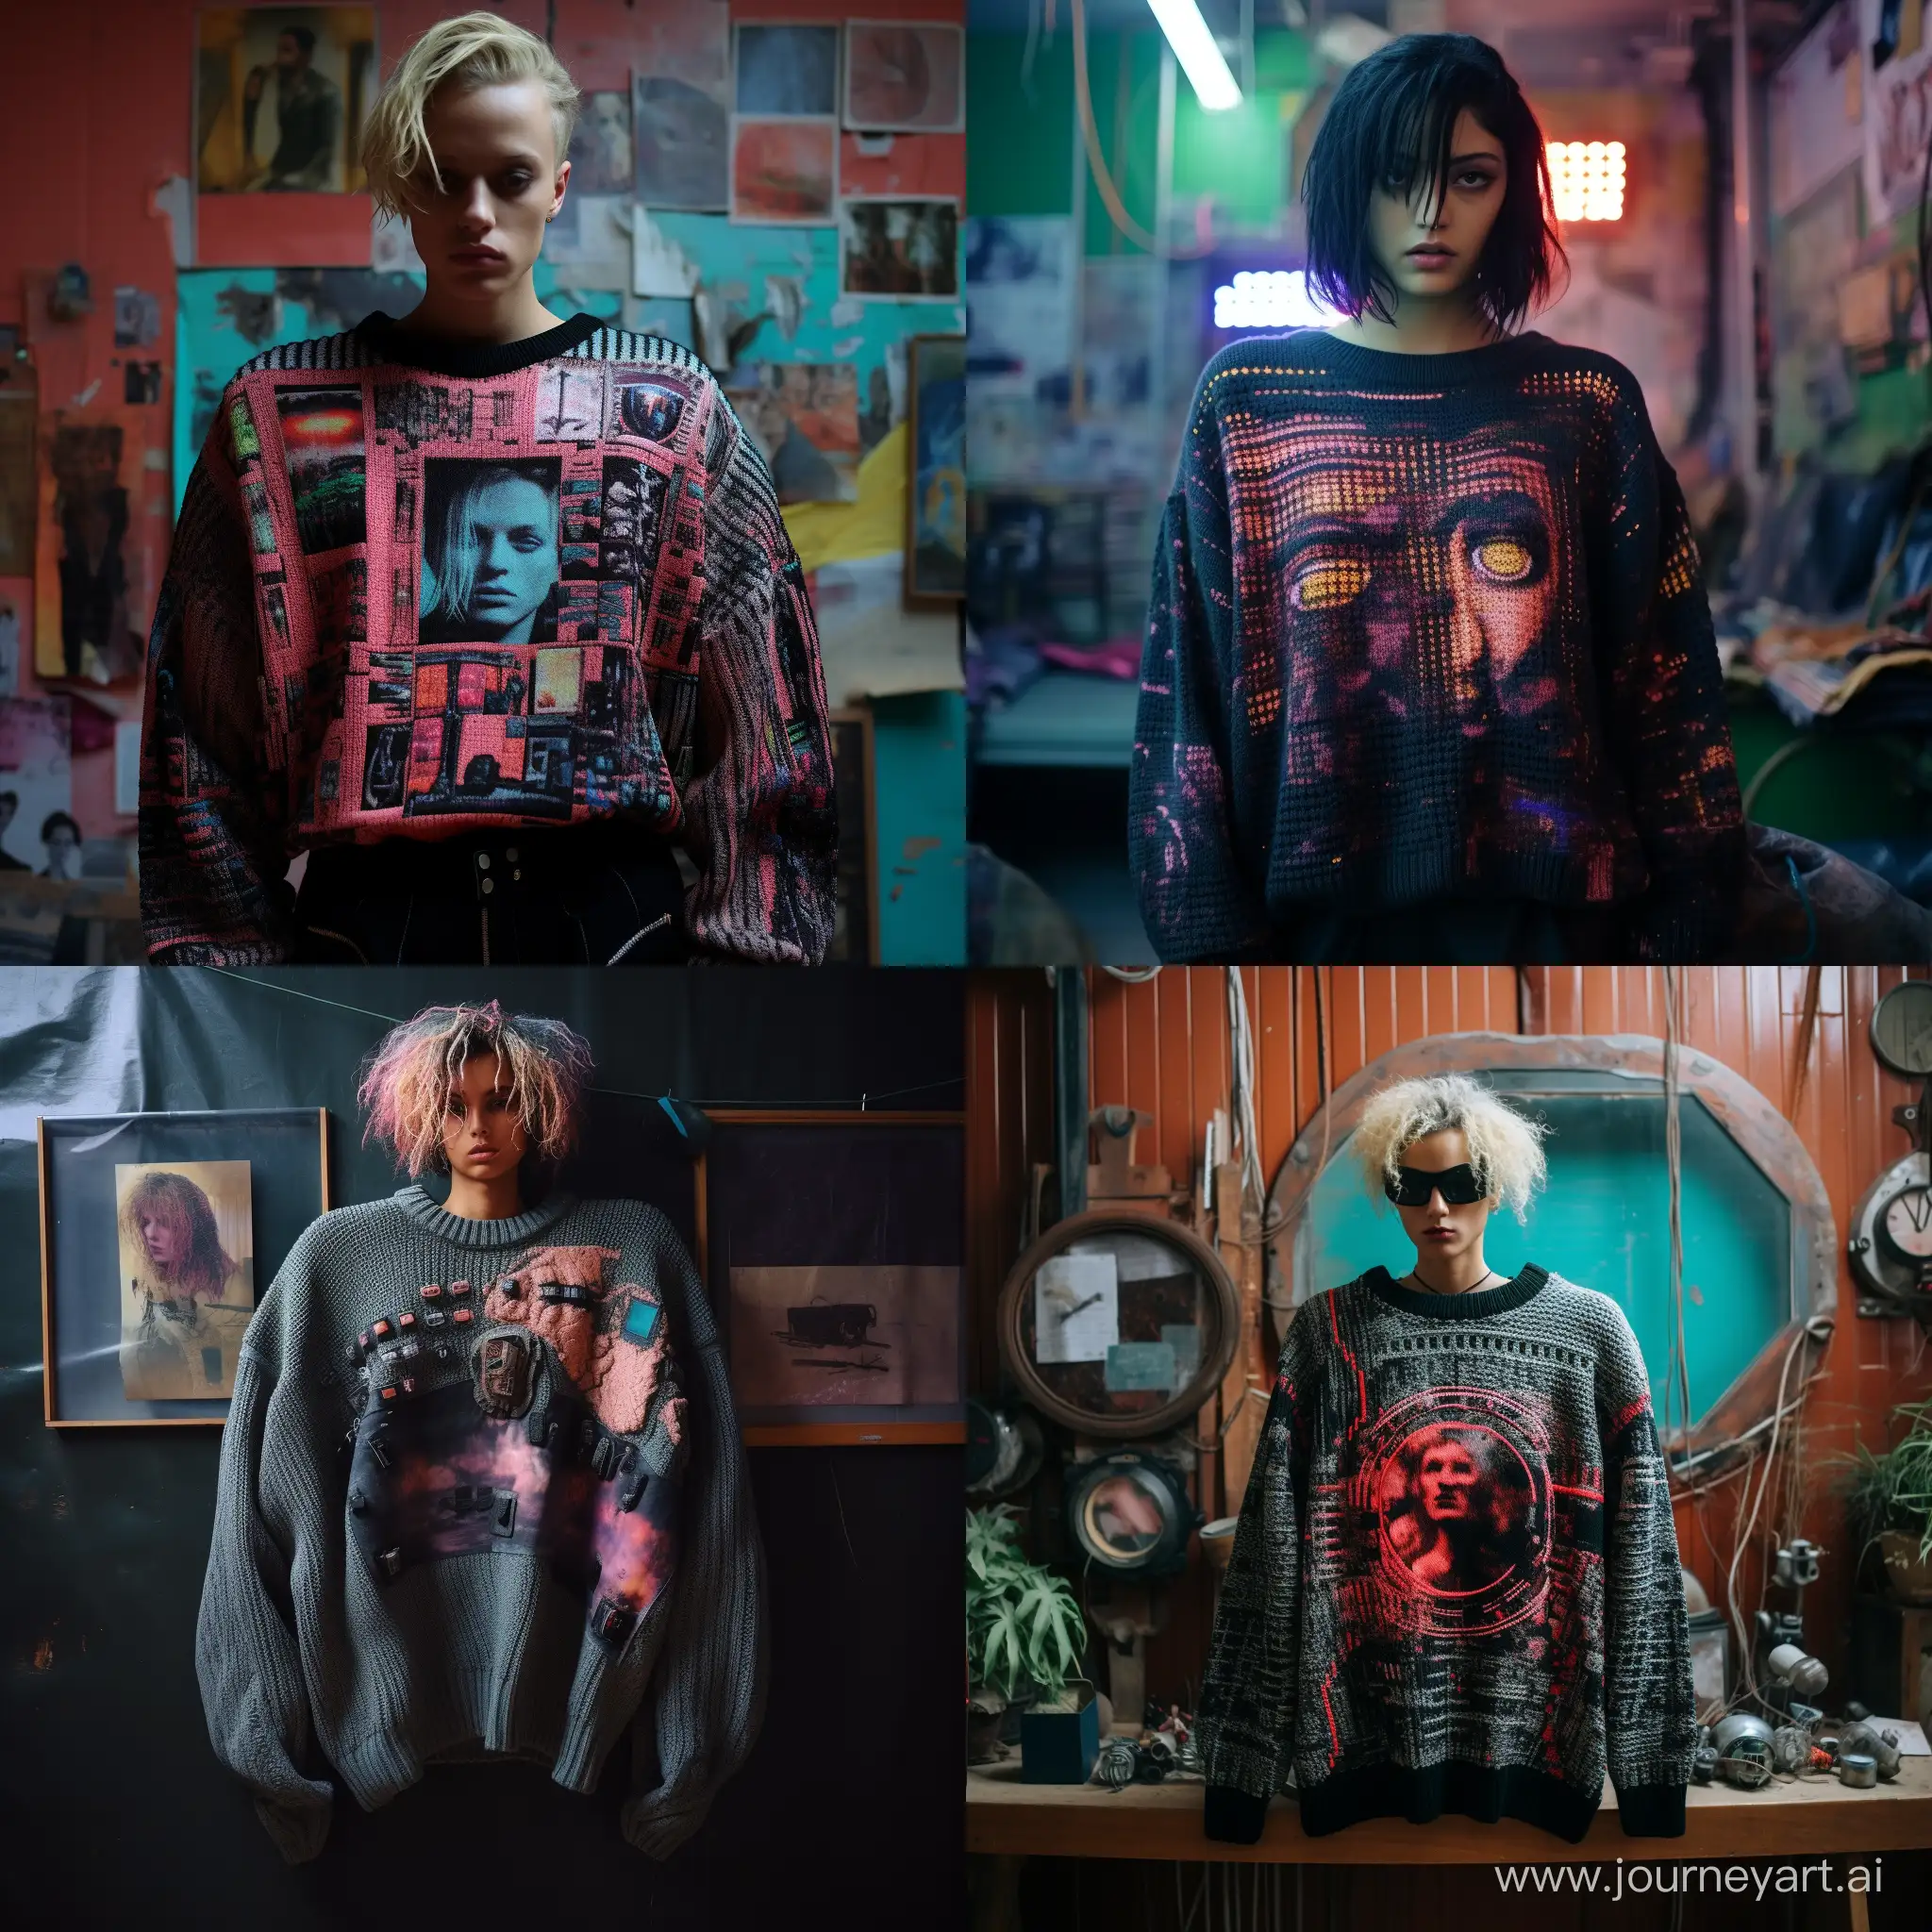 A photo of an oversize knitted sweater with a flat image on a sweater where a computer controls the world, the image is connected from threads, it subdued every person and plant, the punk style of the 80s, cyberpunk films, without people in the picture